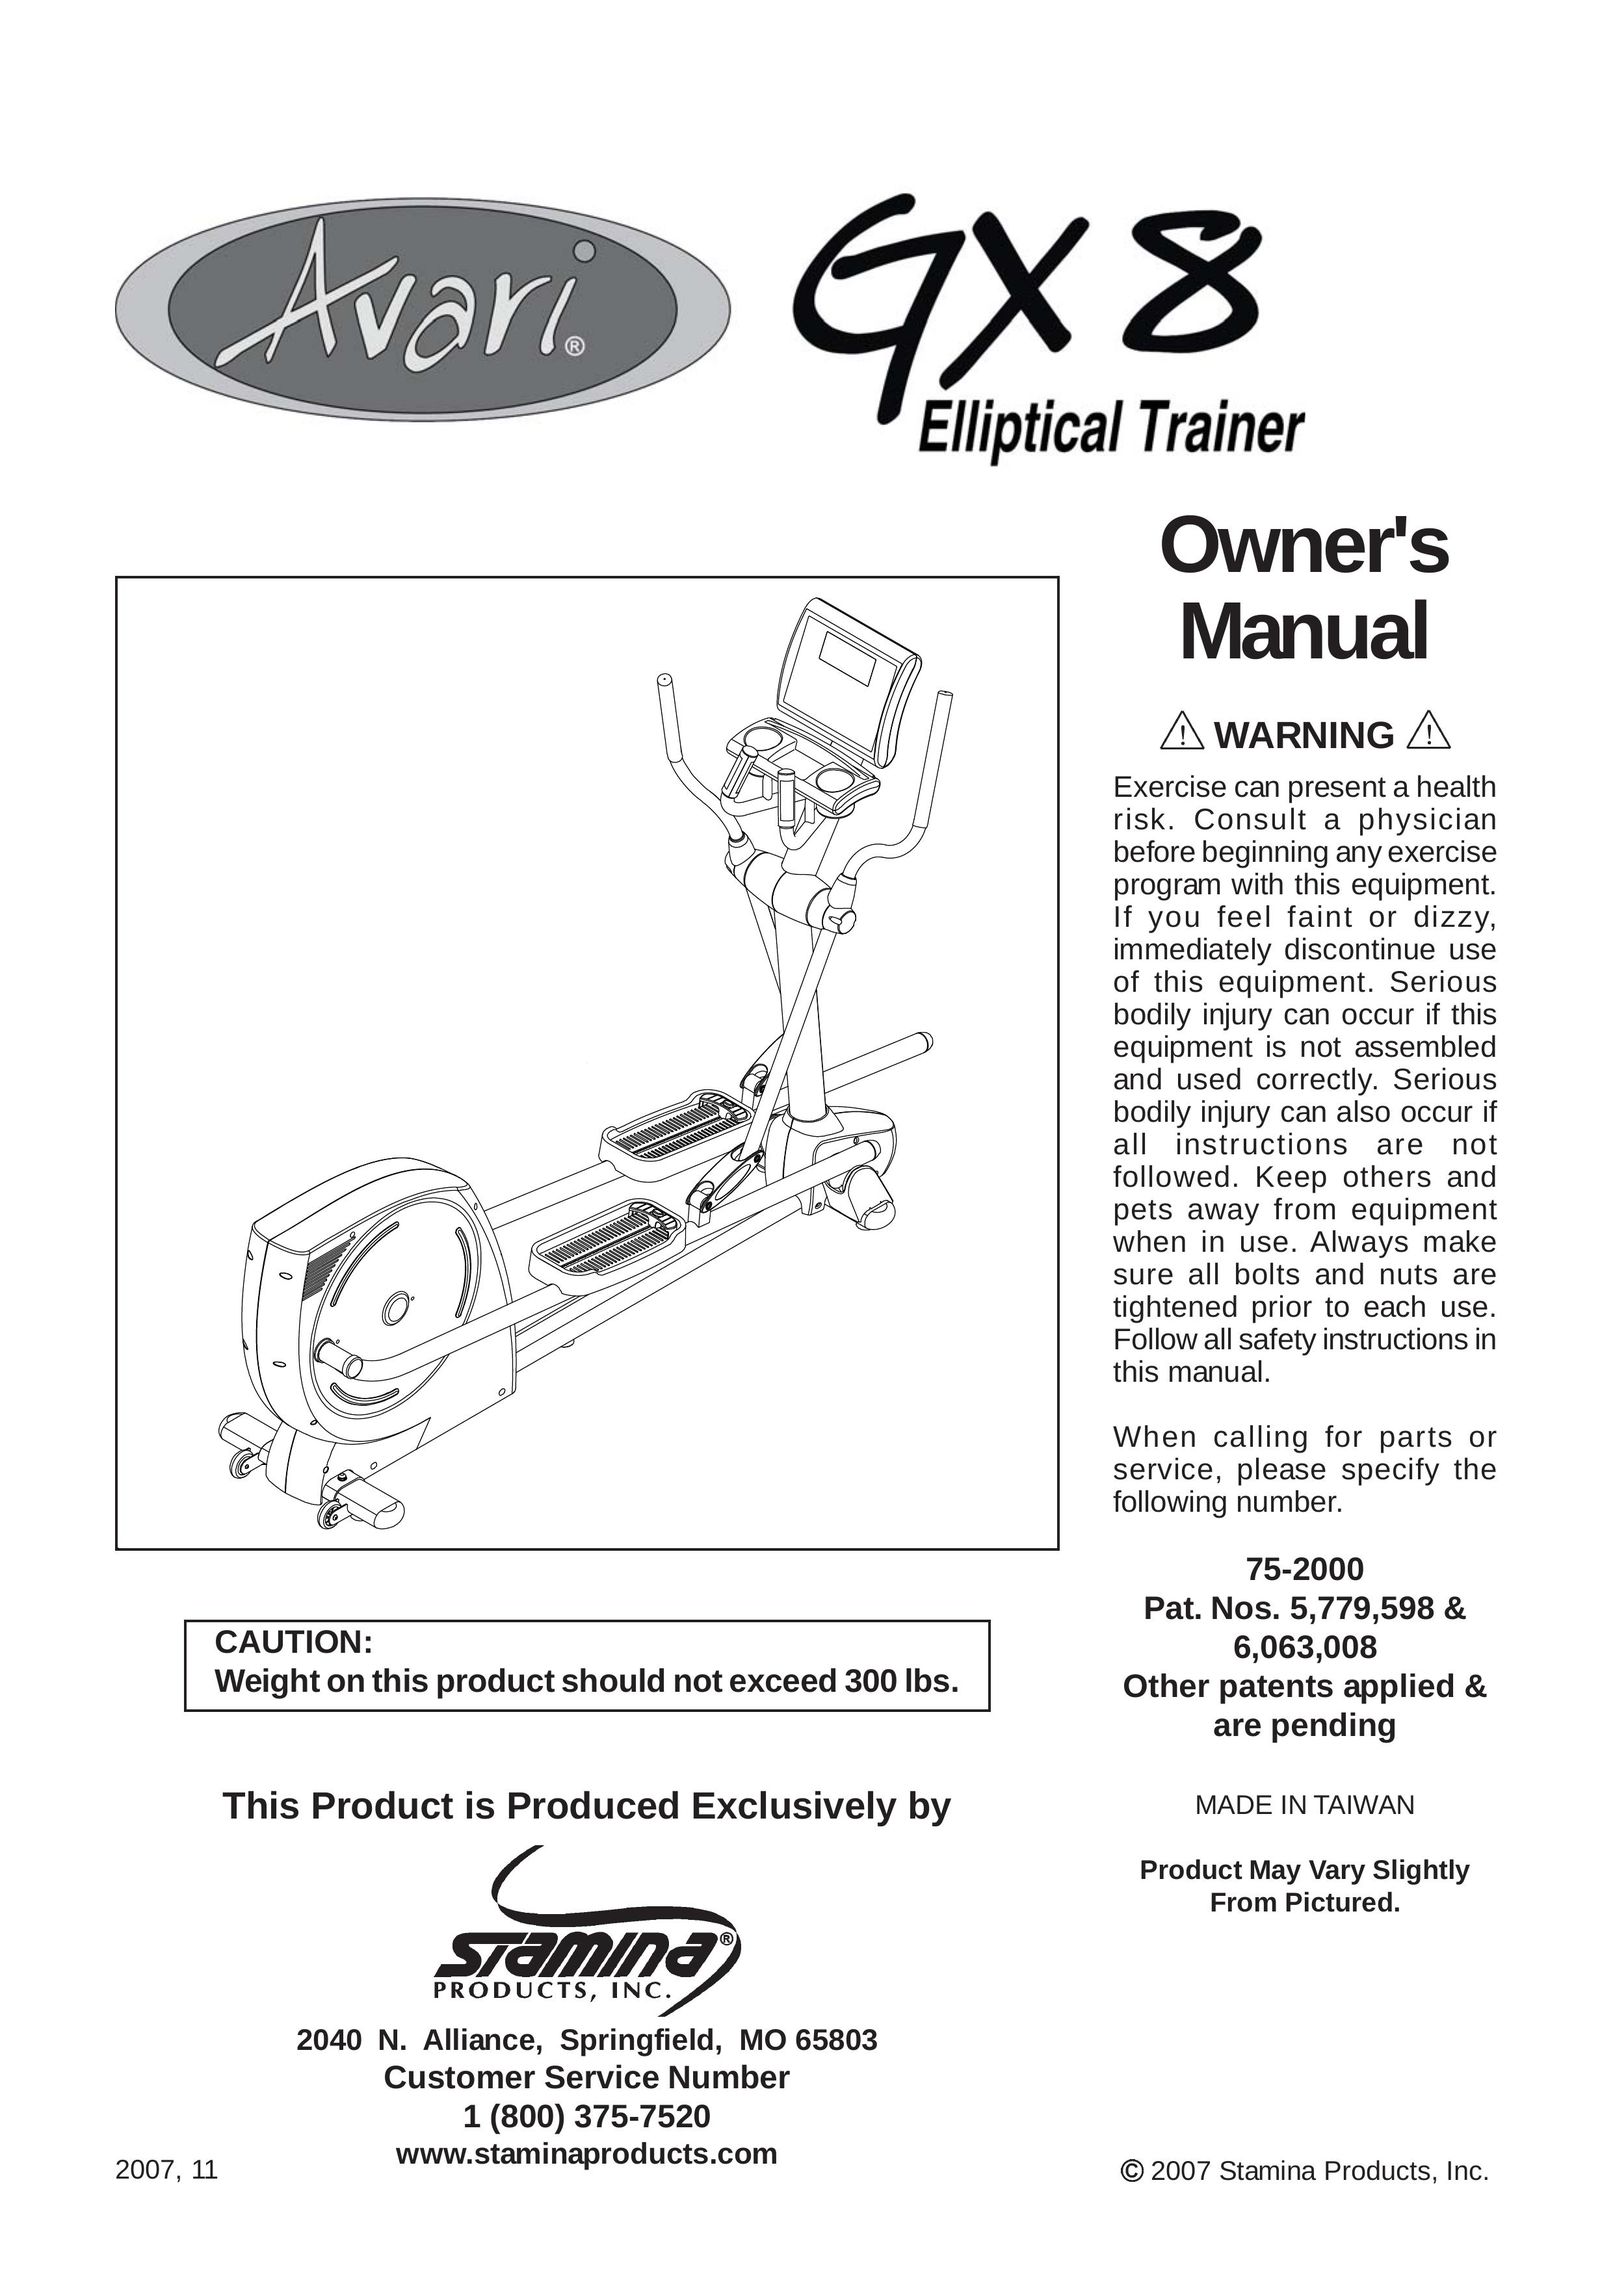 Stamina Products GX 8 Elliptical Trainer User Manual